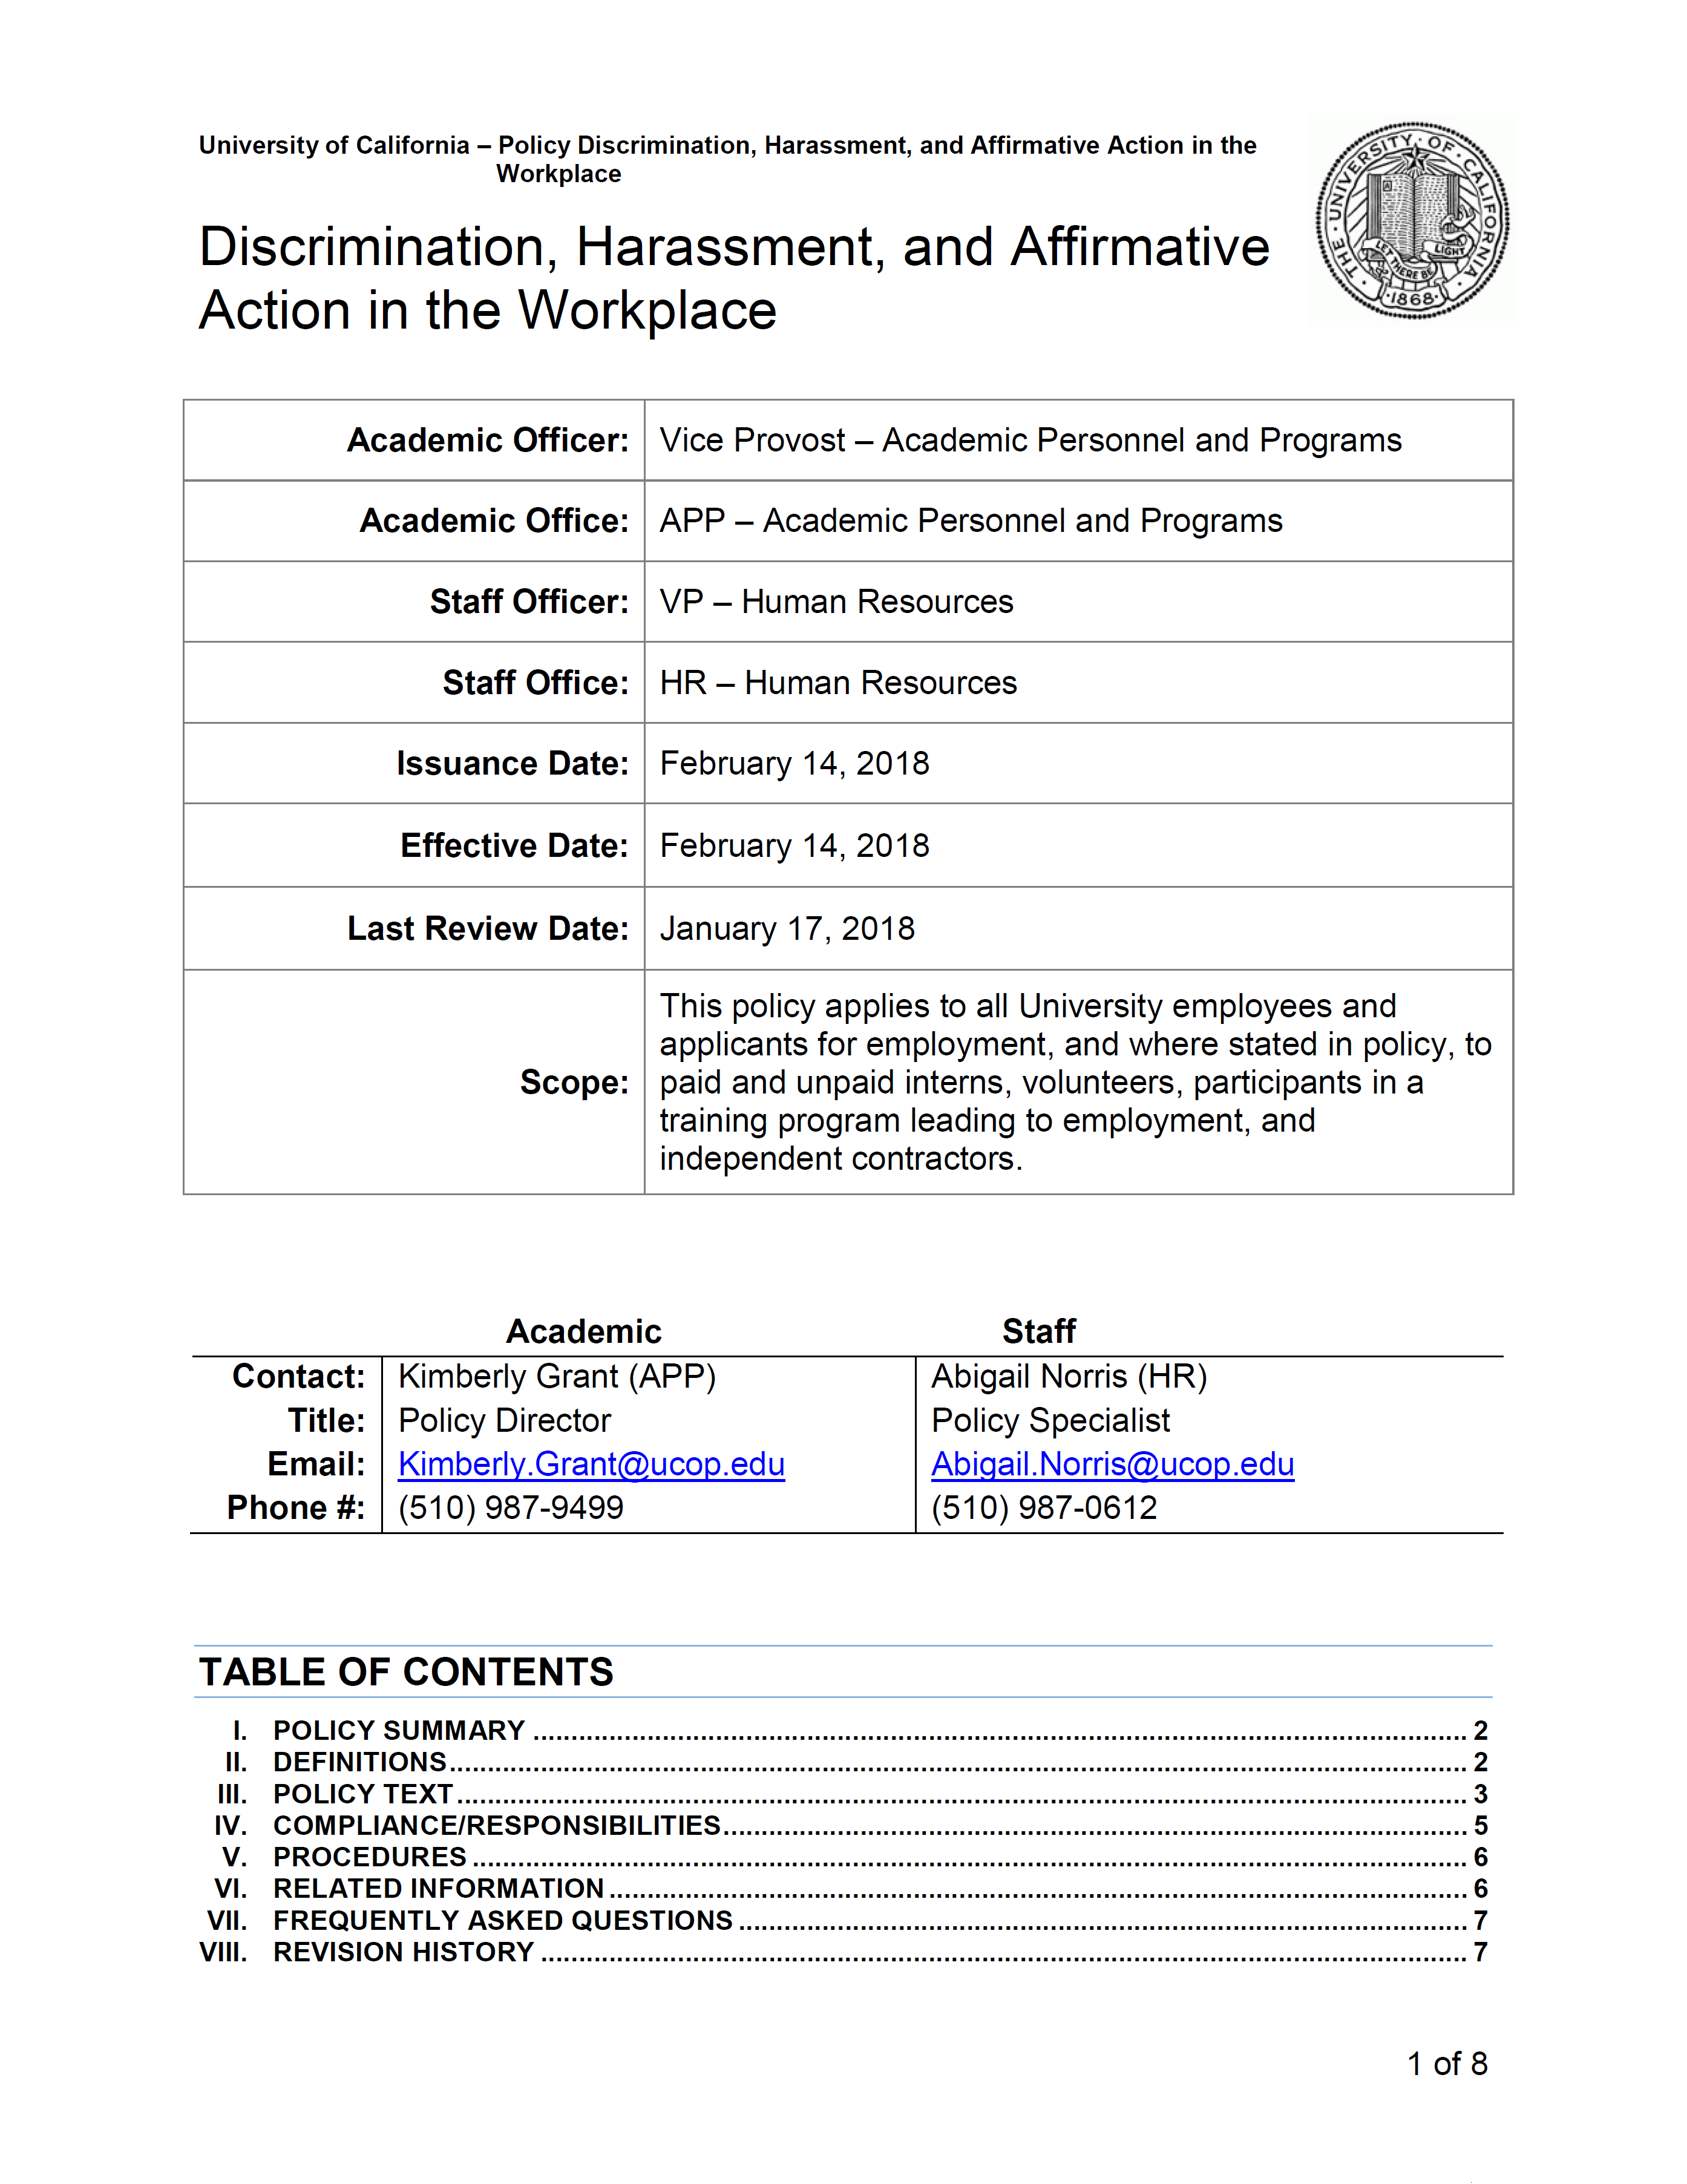 UC Discrimination, Harassment, and Affirmative Action in the Workplace Policy